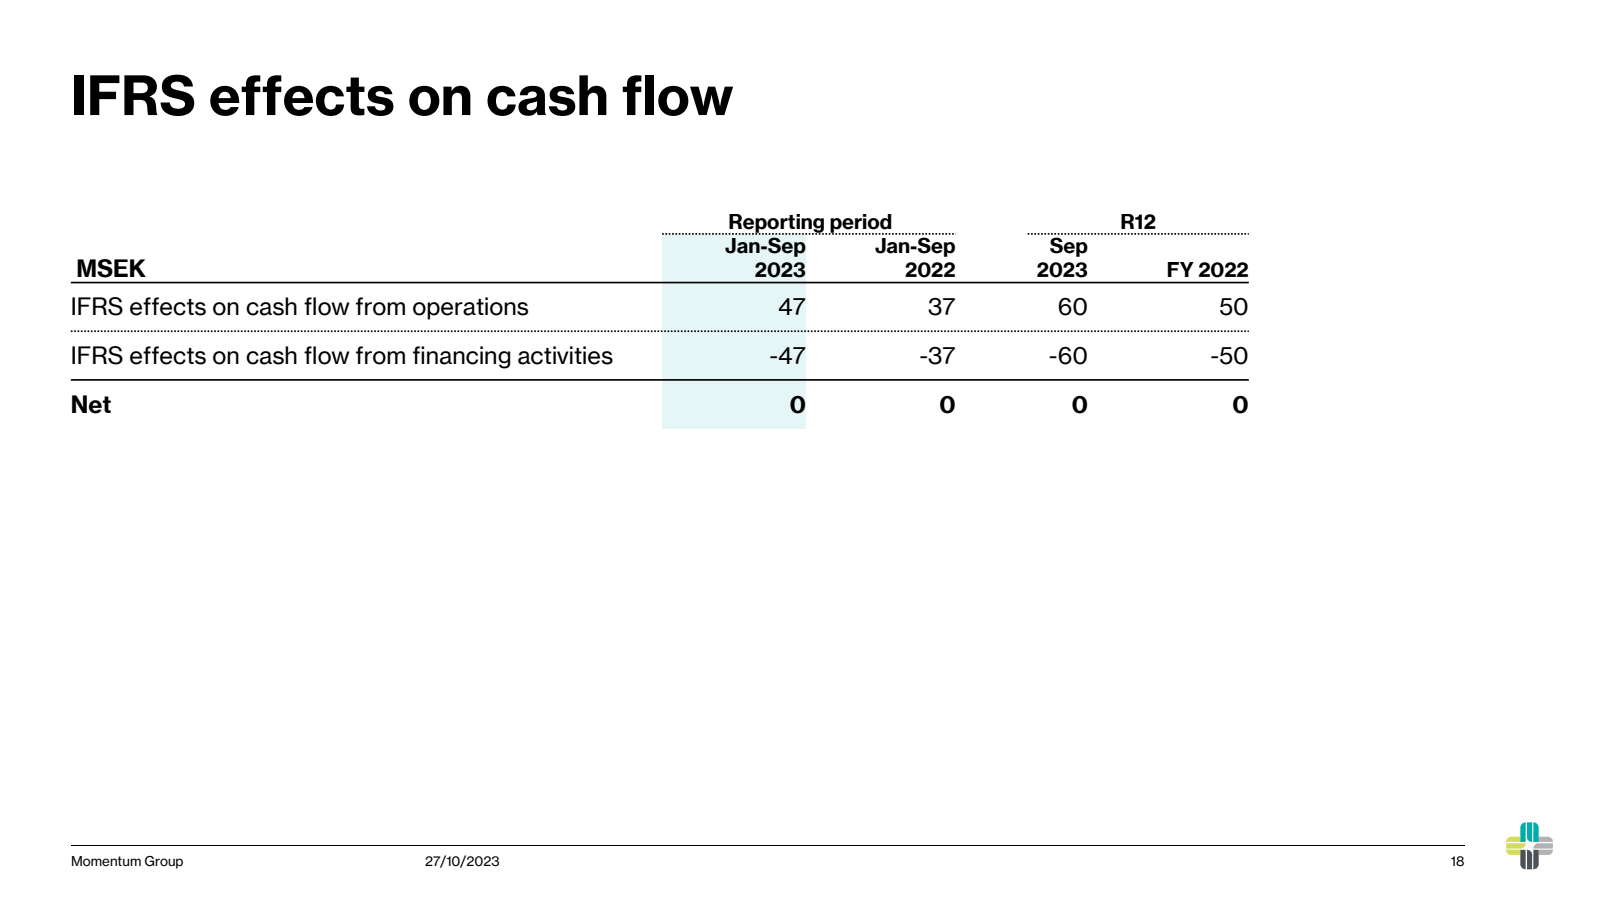 IFRS effects on cash